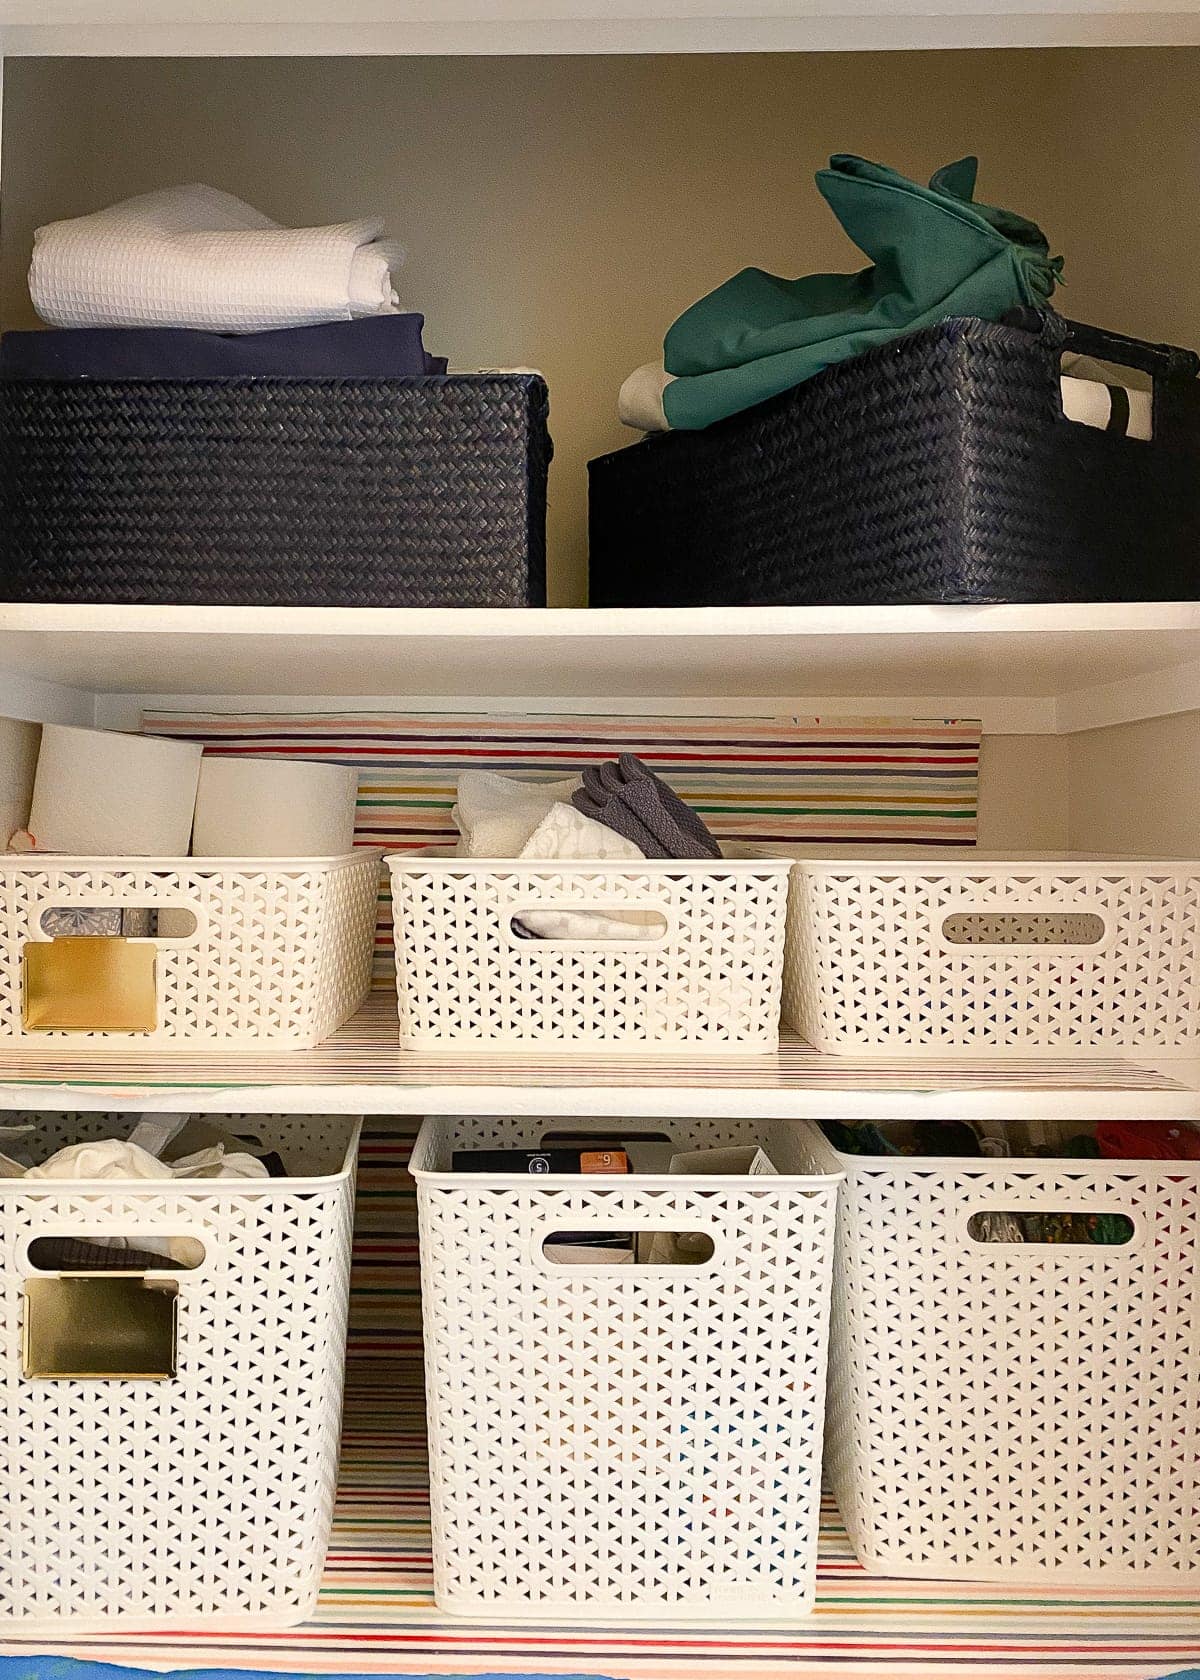 https://thehomesihavemade.com/practical-tips-for-organizing-a-linen-closet_before_5/